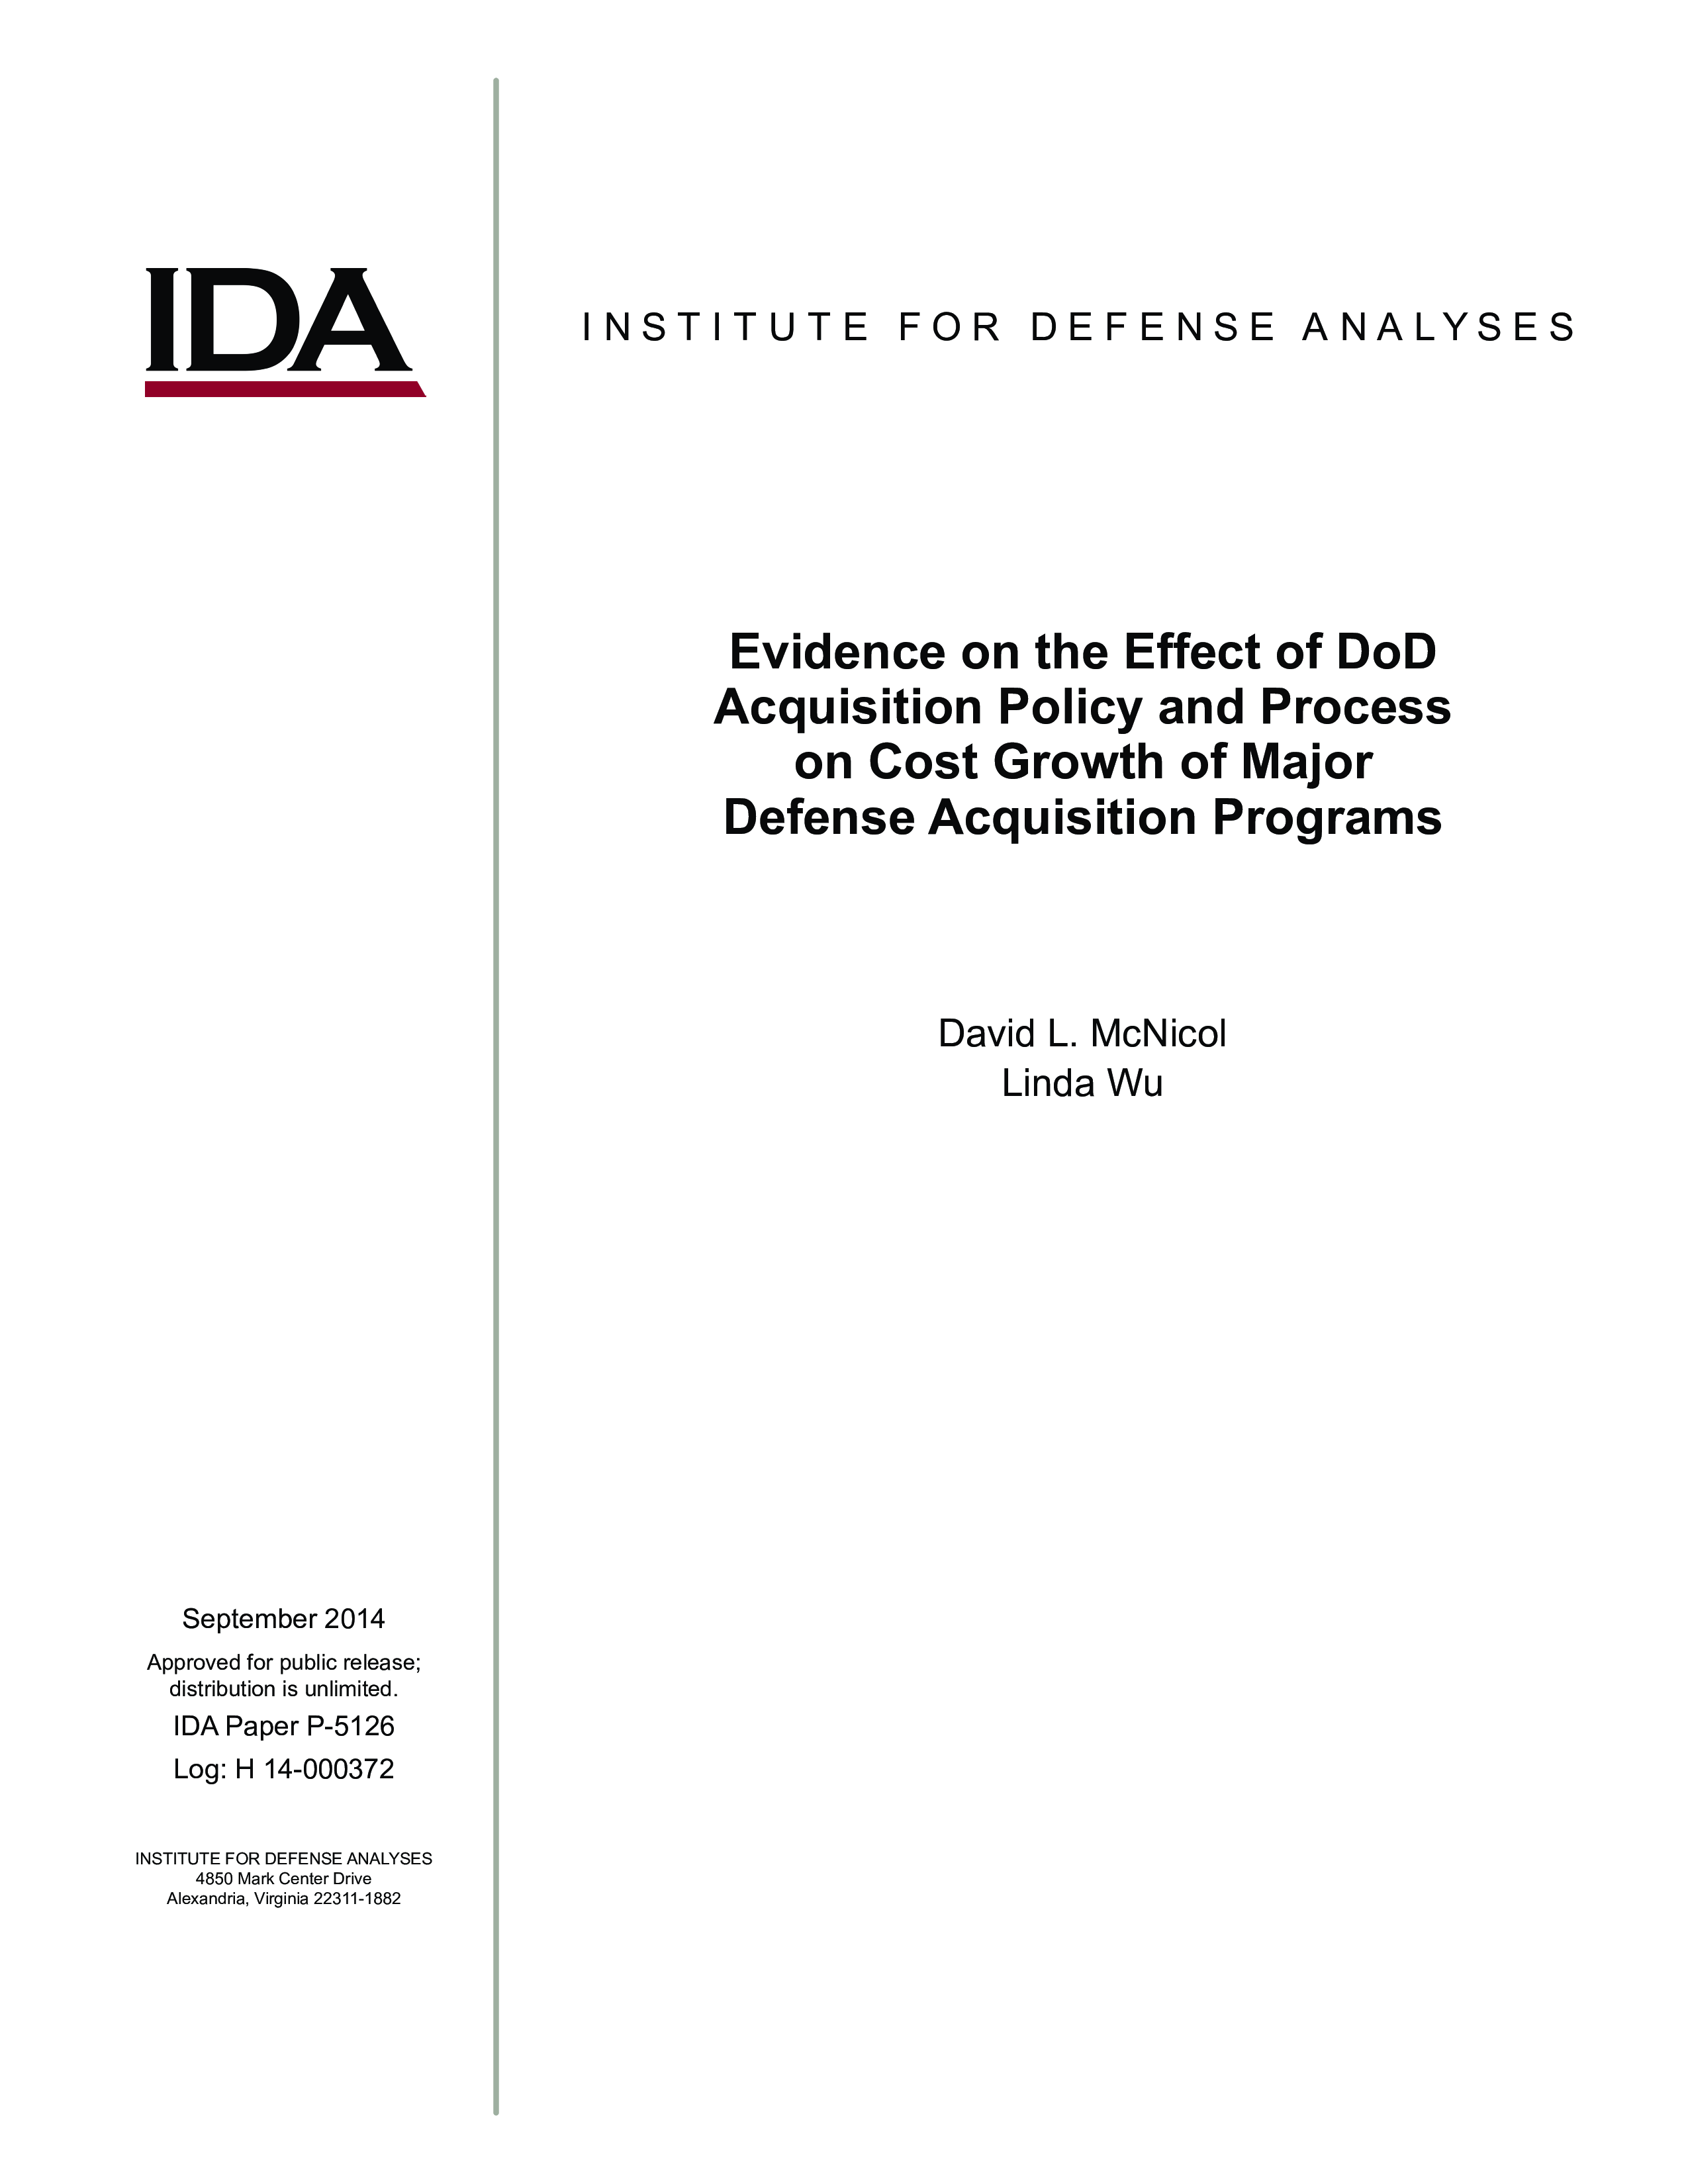 Evidence on the Effect of DoD Acquisition Policy and Proces on Cost Growth of Major Defense Acquisition Programs